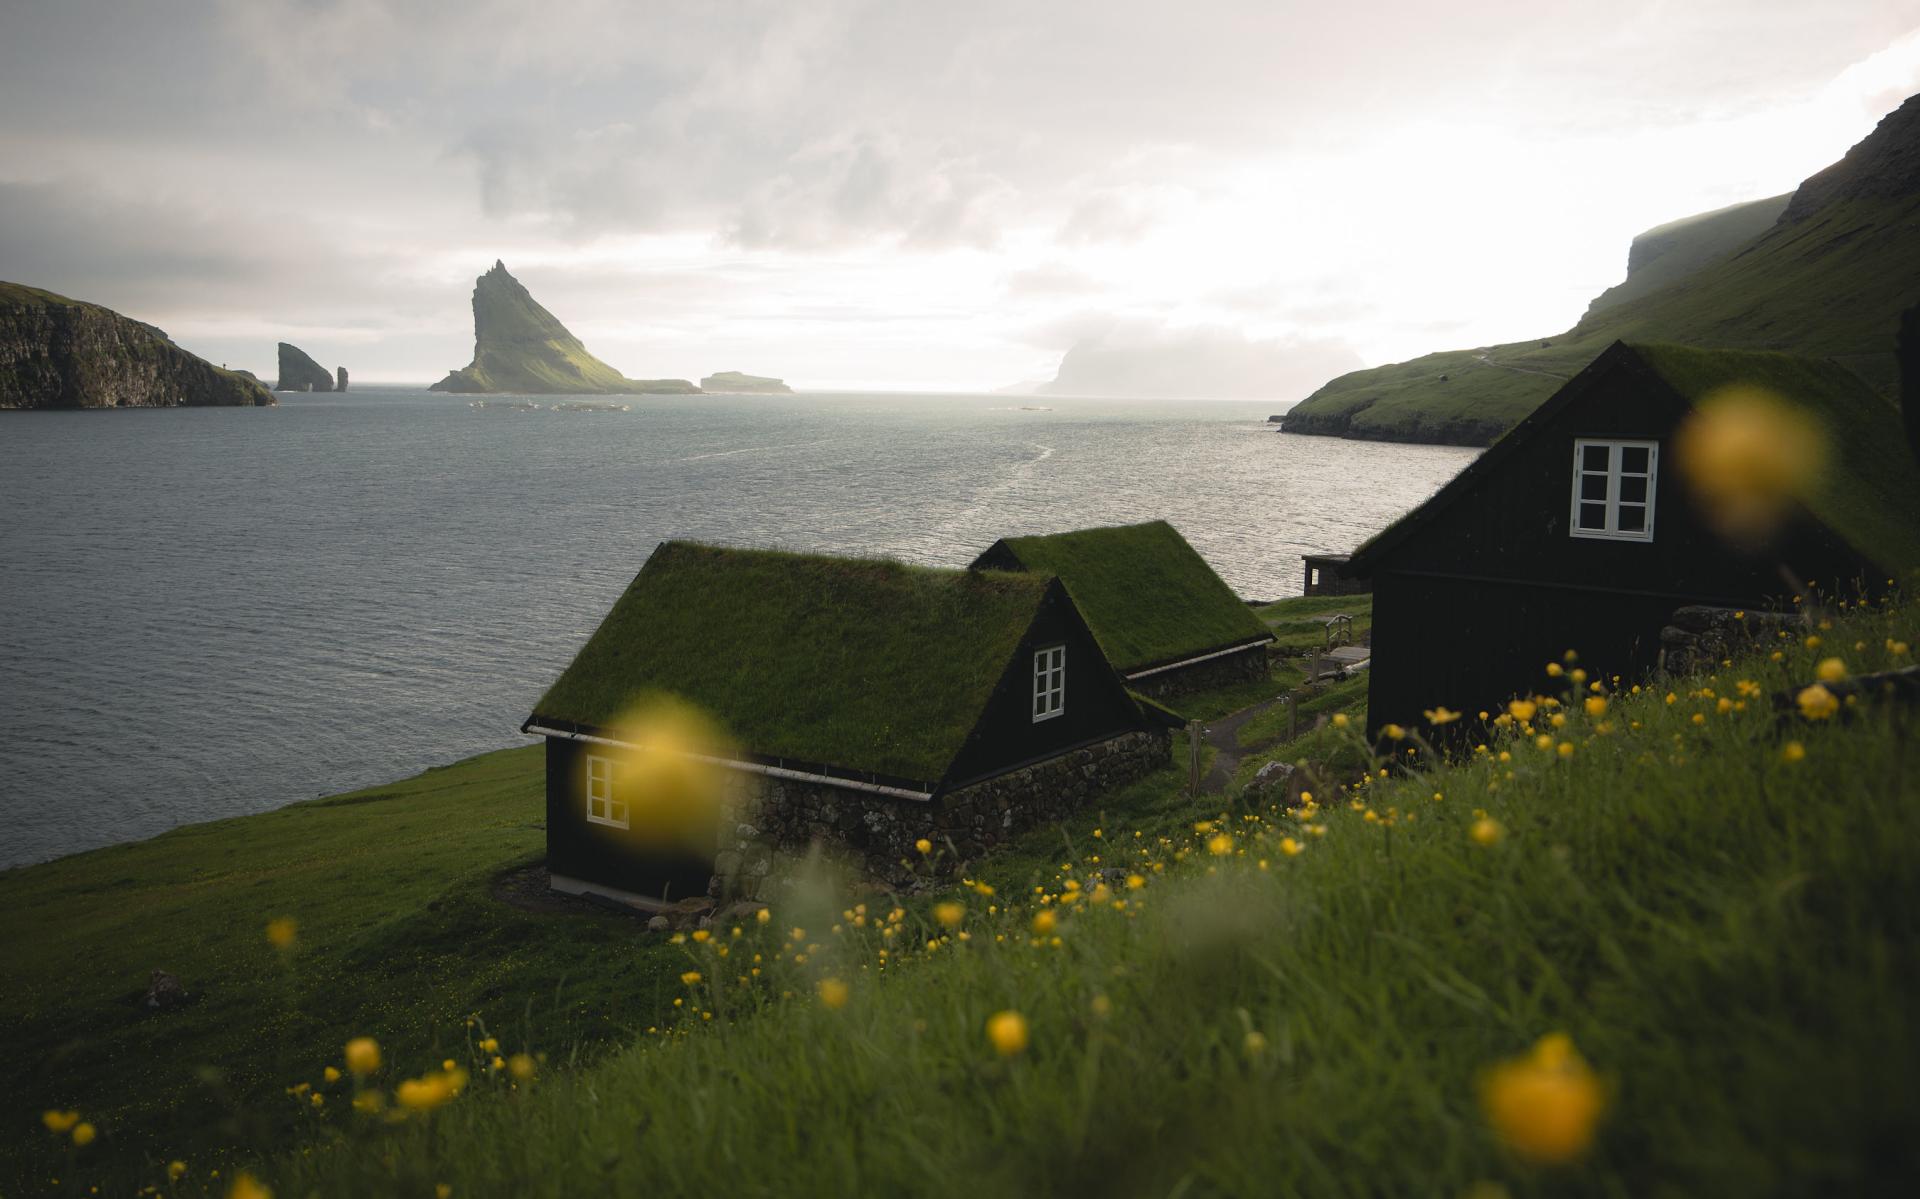 Thumbnail of - Turf houses in the village Bø, located in the Faroe Islands. Green grass with yellow dandelions. The stunning scenery of mountains and sea cliffs. 